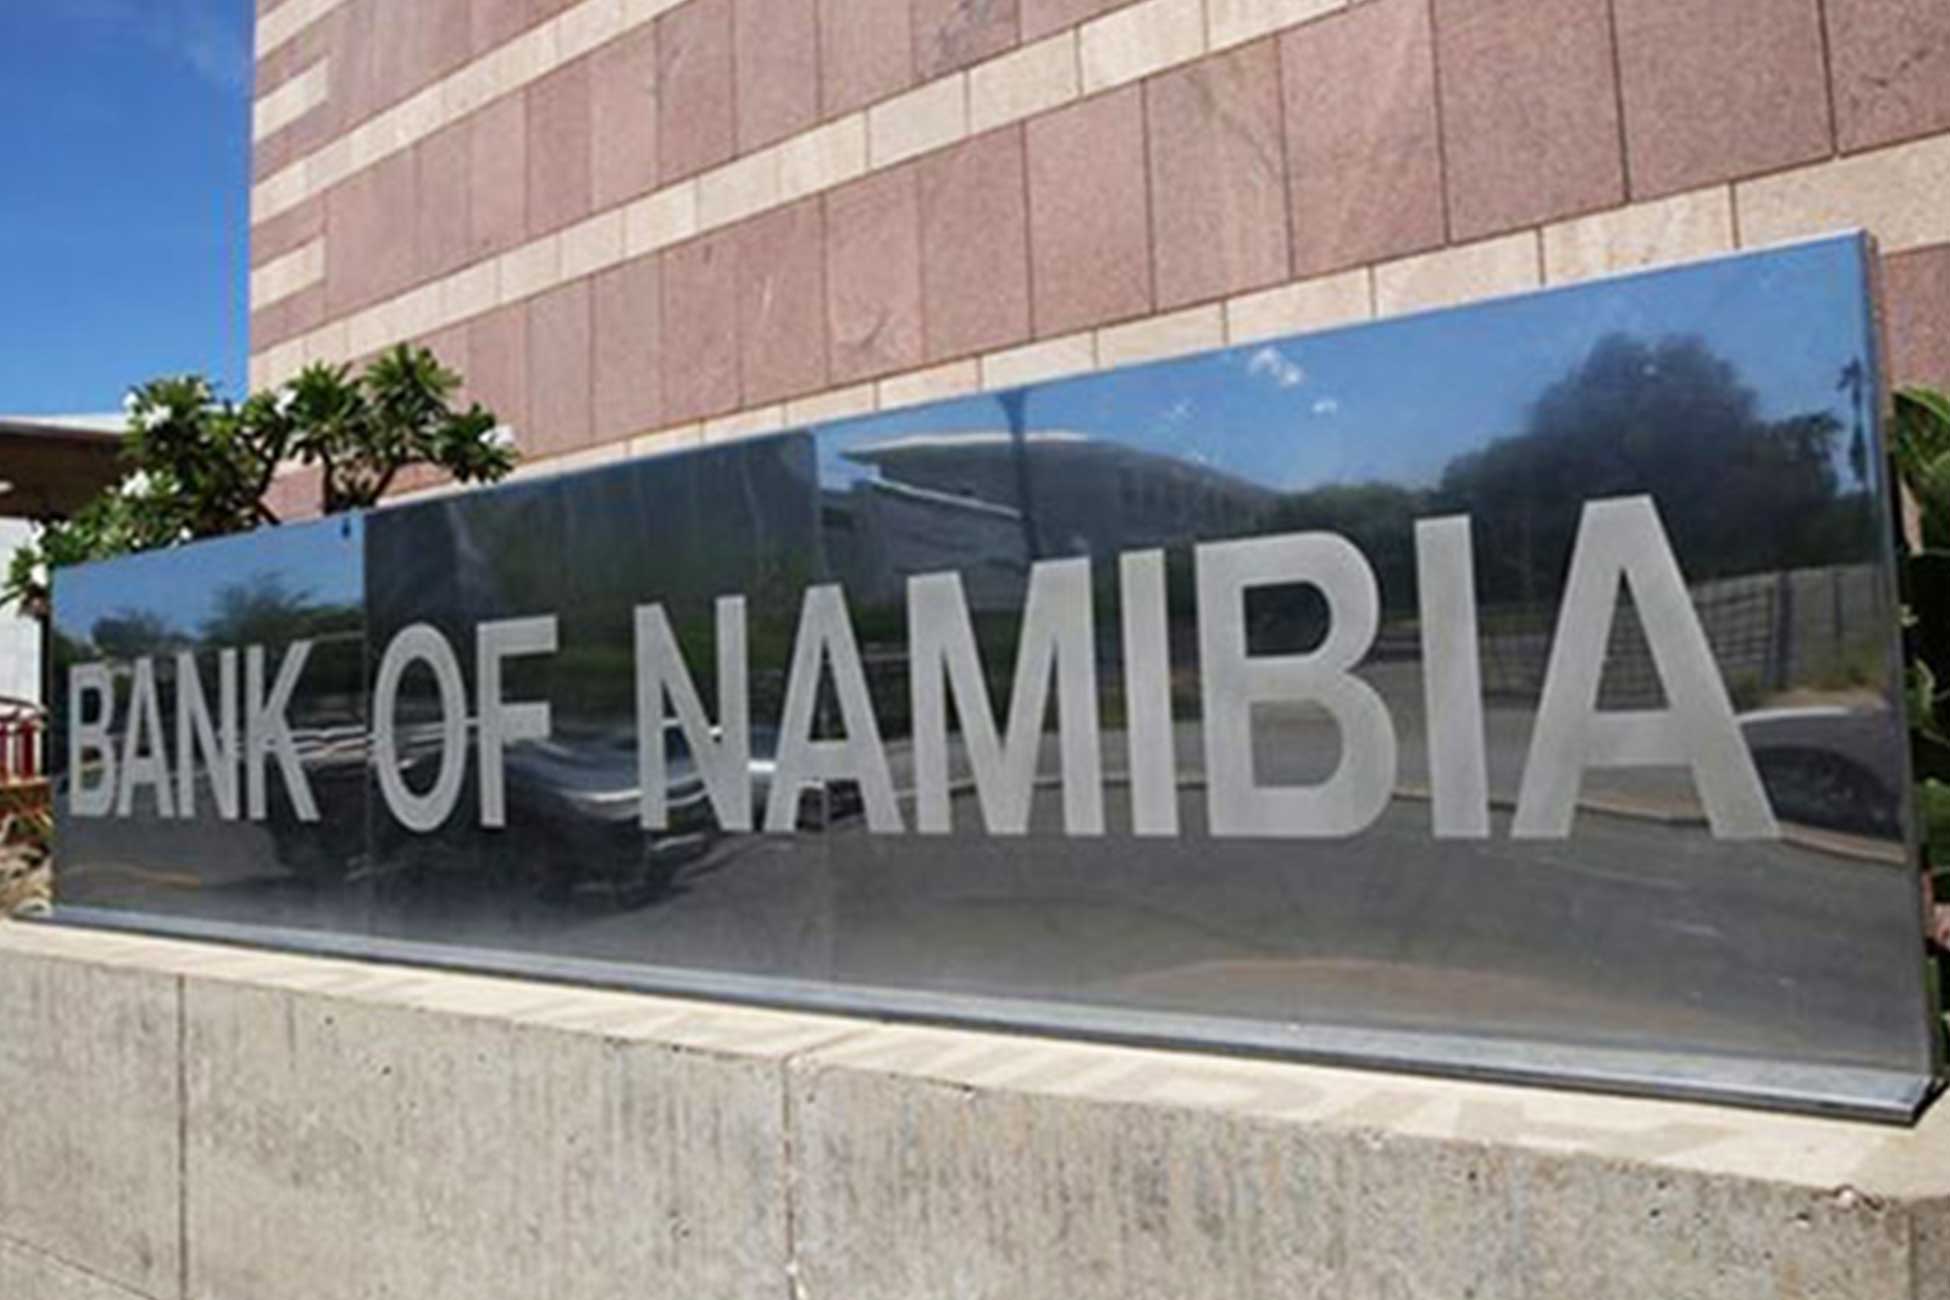 Open a bank account in Namibia